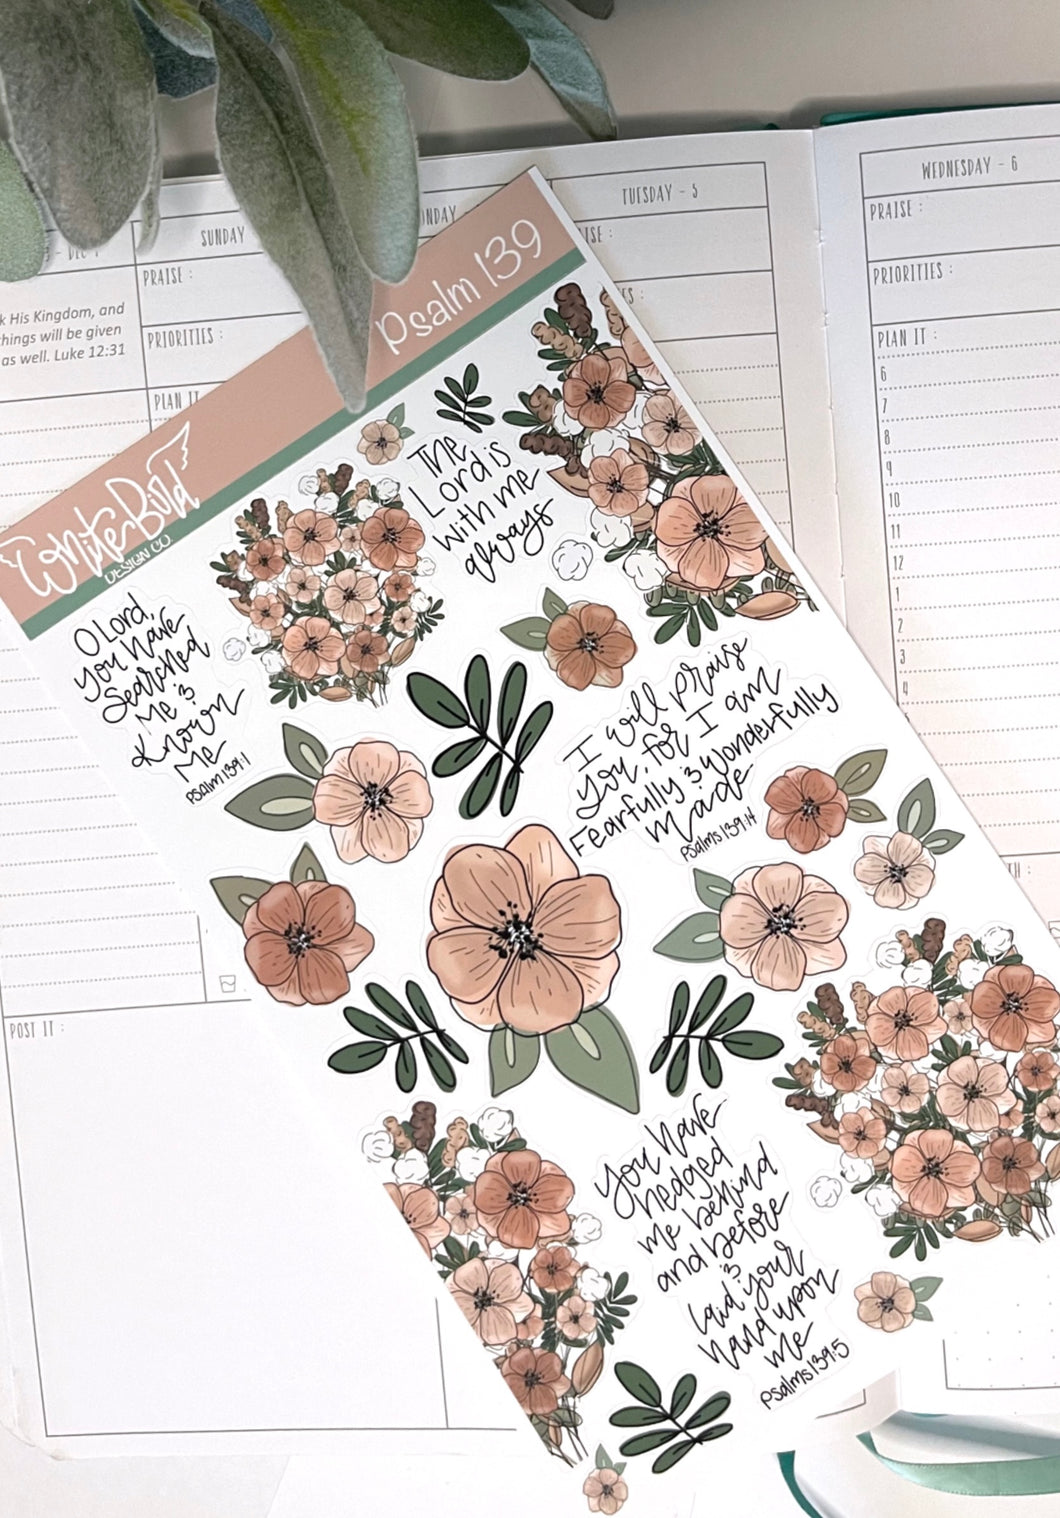 Psalm 139 Faith Sticker Sheets| Christian Planner Stickers| Neutral Floral Stickers|Journal Stickers| Bible Stickers| Monthly StickerSets